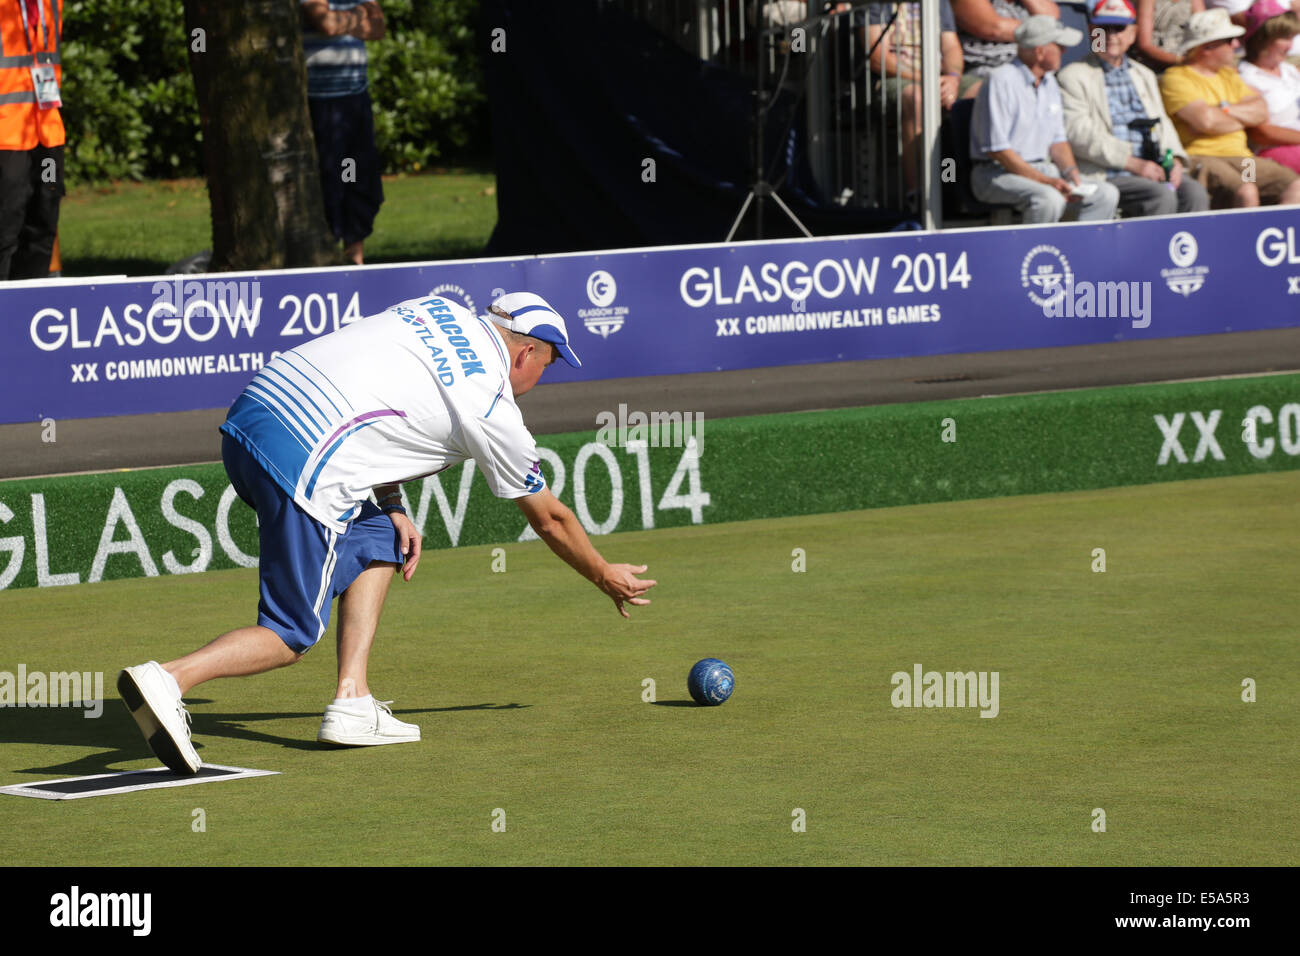 Kelvingrove Lawn Bowls Centre, Glasgow, Scotland, UK, Friday, 25th  July, 2014. David Peacock of Scotland playing in a Men's Triples Lawn Bowls Preliminary Match at the Glasgow 2014 Commonwealth Games Stock Photo